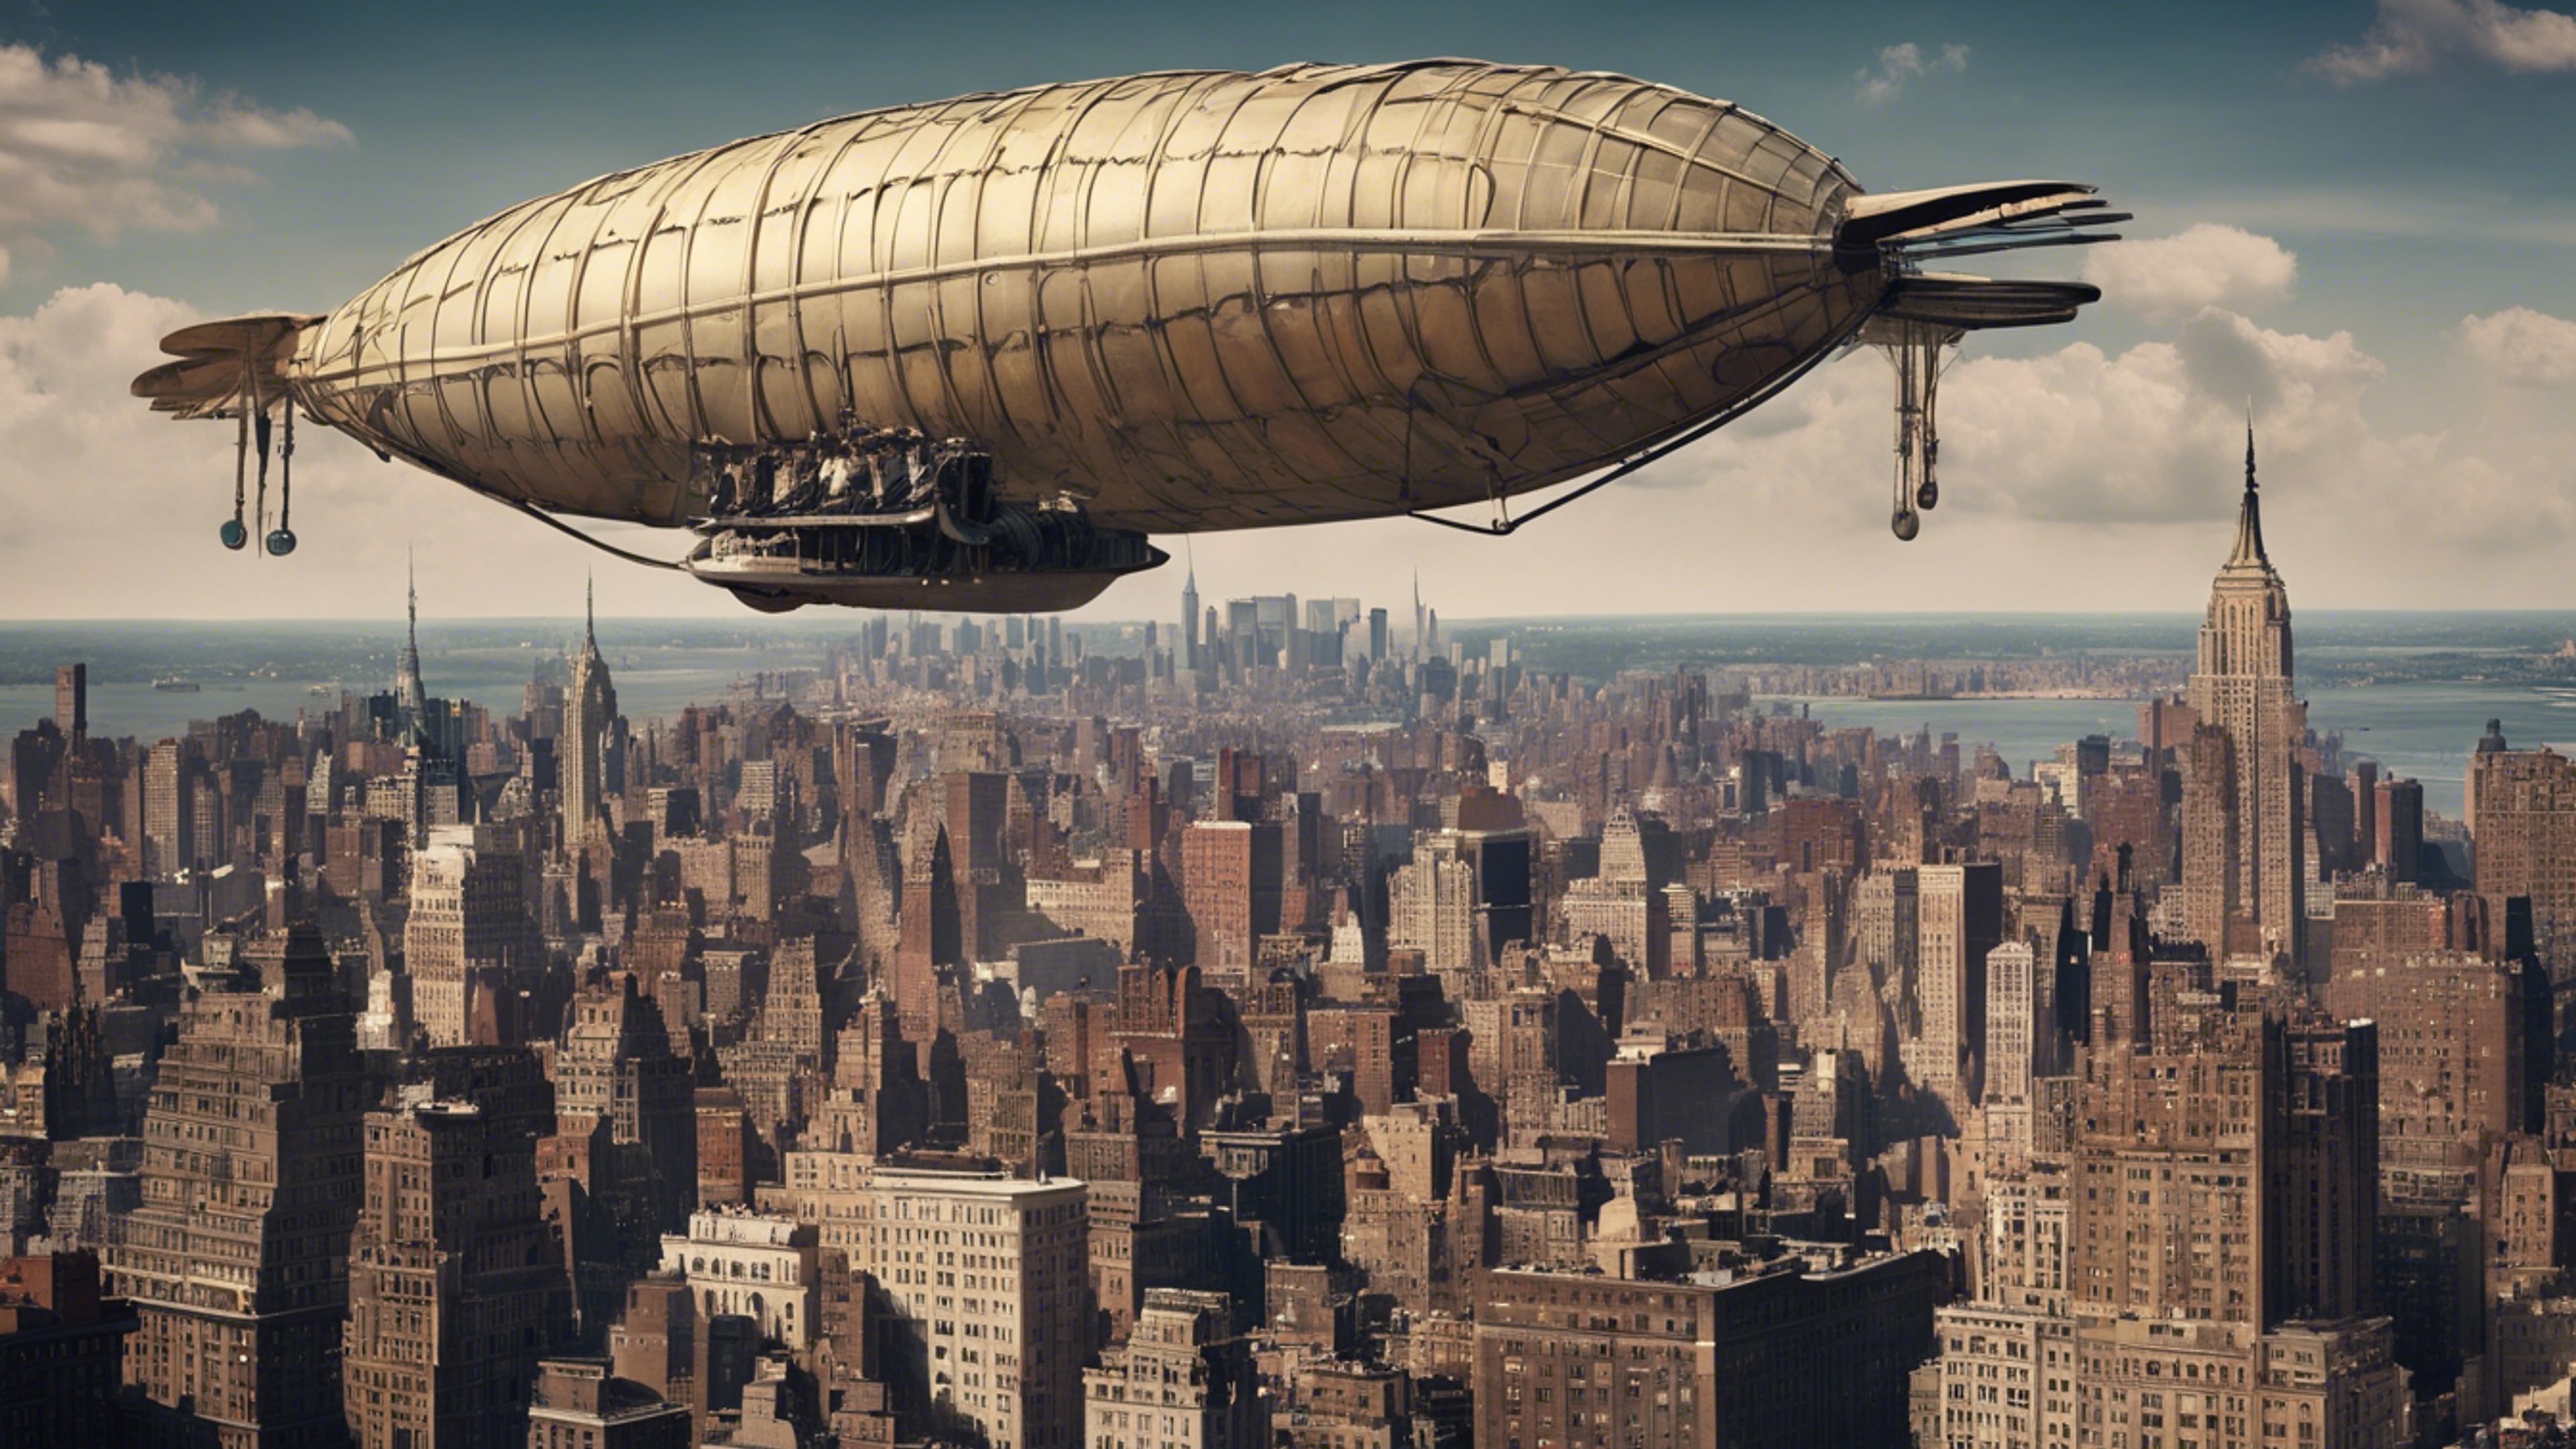 A nostalgic skyline view of 1920s New York City, peppered with zeppelins.壁紙[5c42609b28fb4c129601]